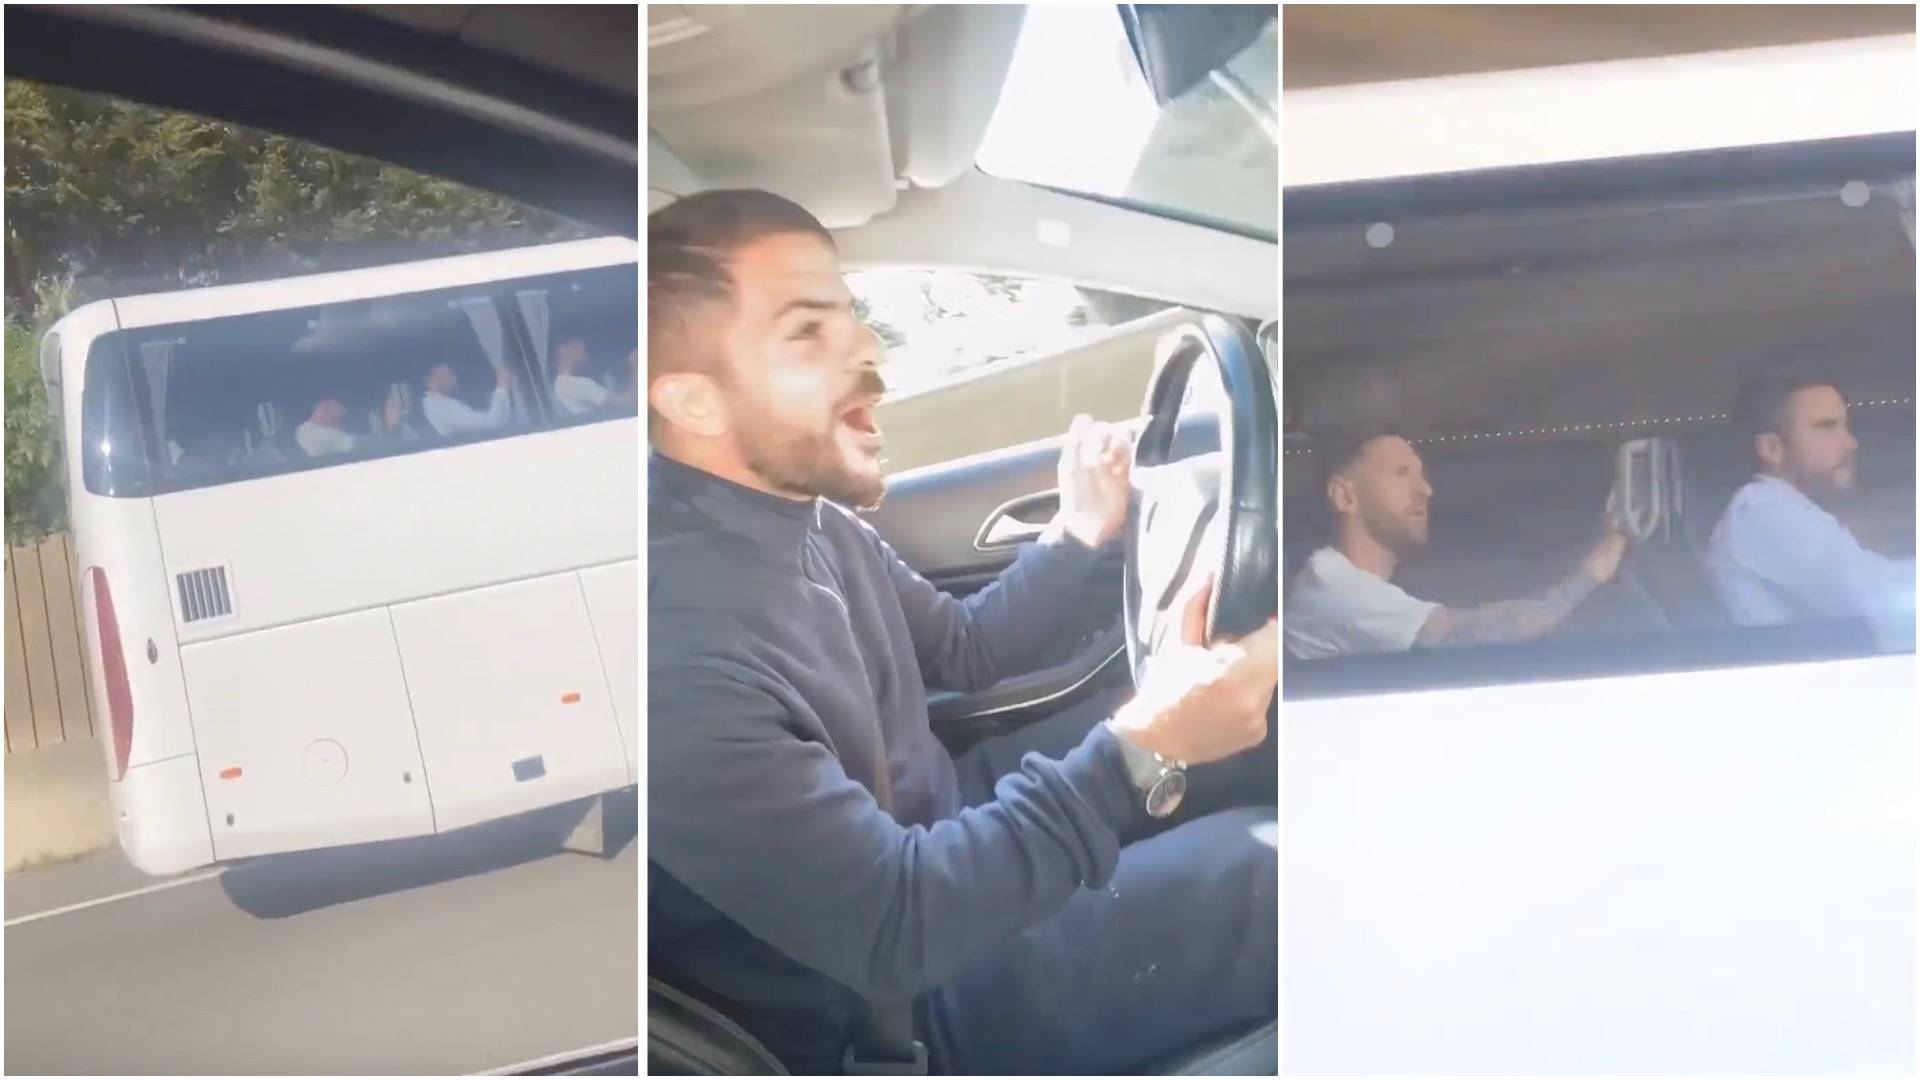 ‘THE GOAT, MAN!’ - Fan loses it after spotting Lionel Messi on Argentina team bus in England